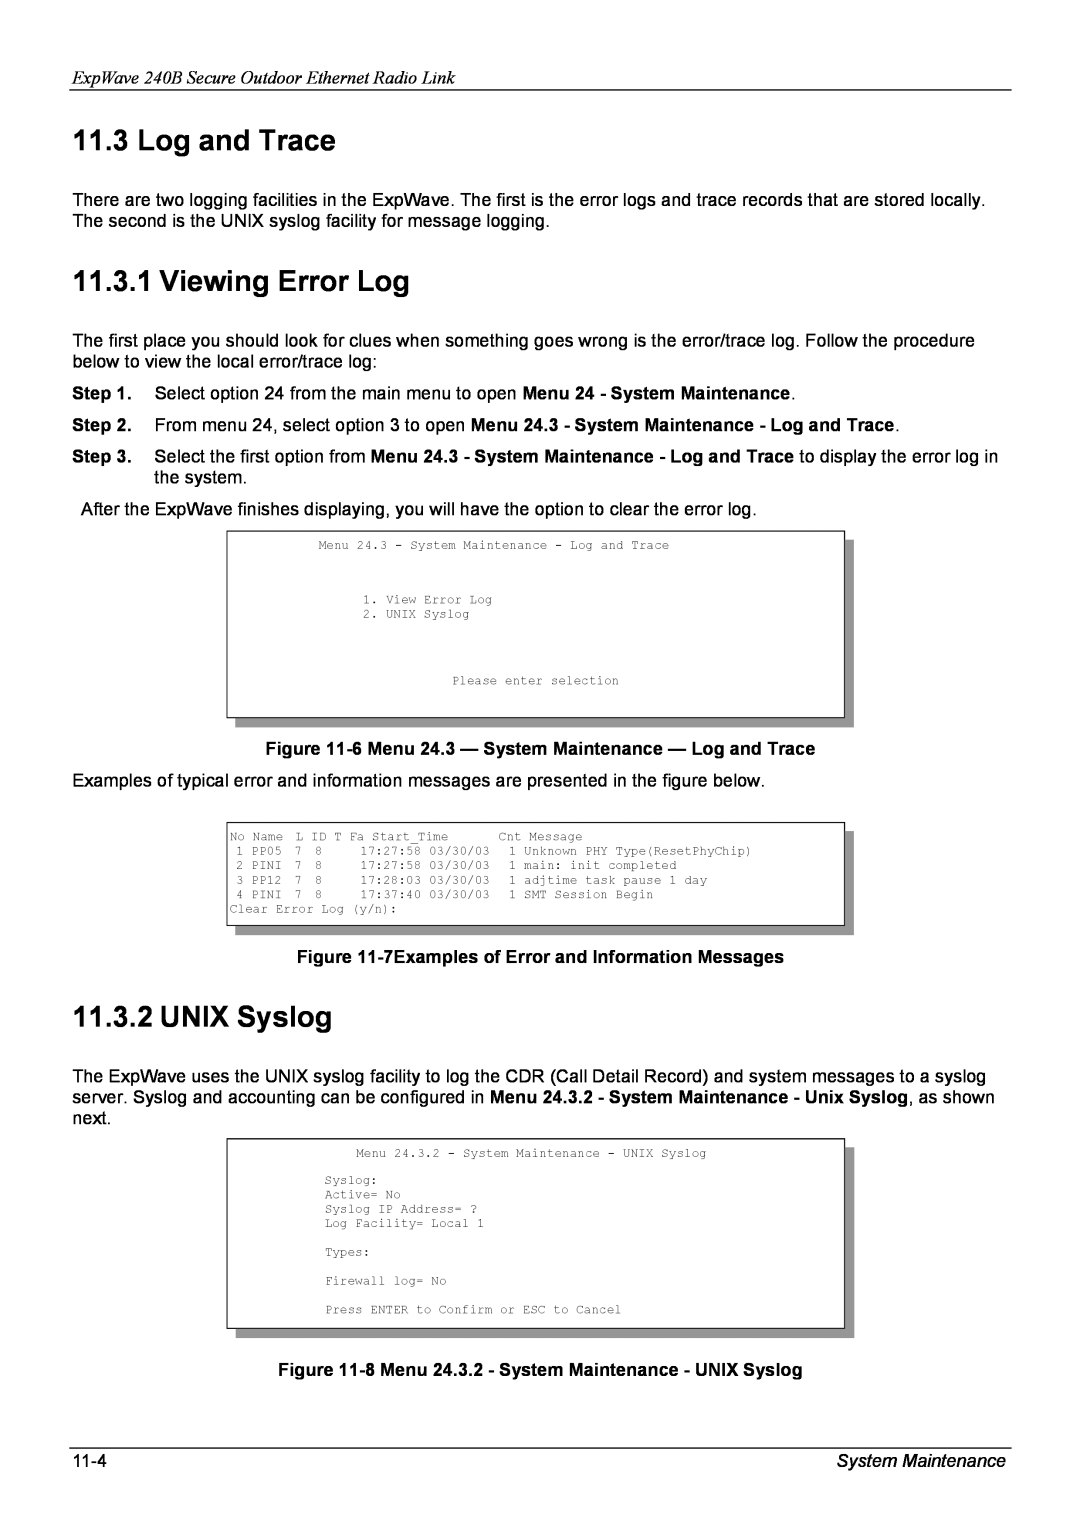 ZyXEL Communications Log and Trace, Viewing Error Log, UNIX Syslog, ExpWave 240B Secure Outdoor Ethernet Radio Link 